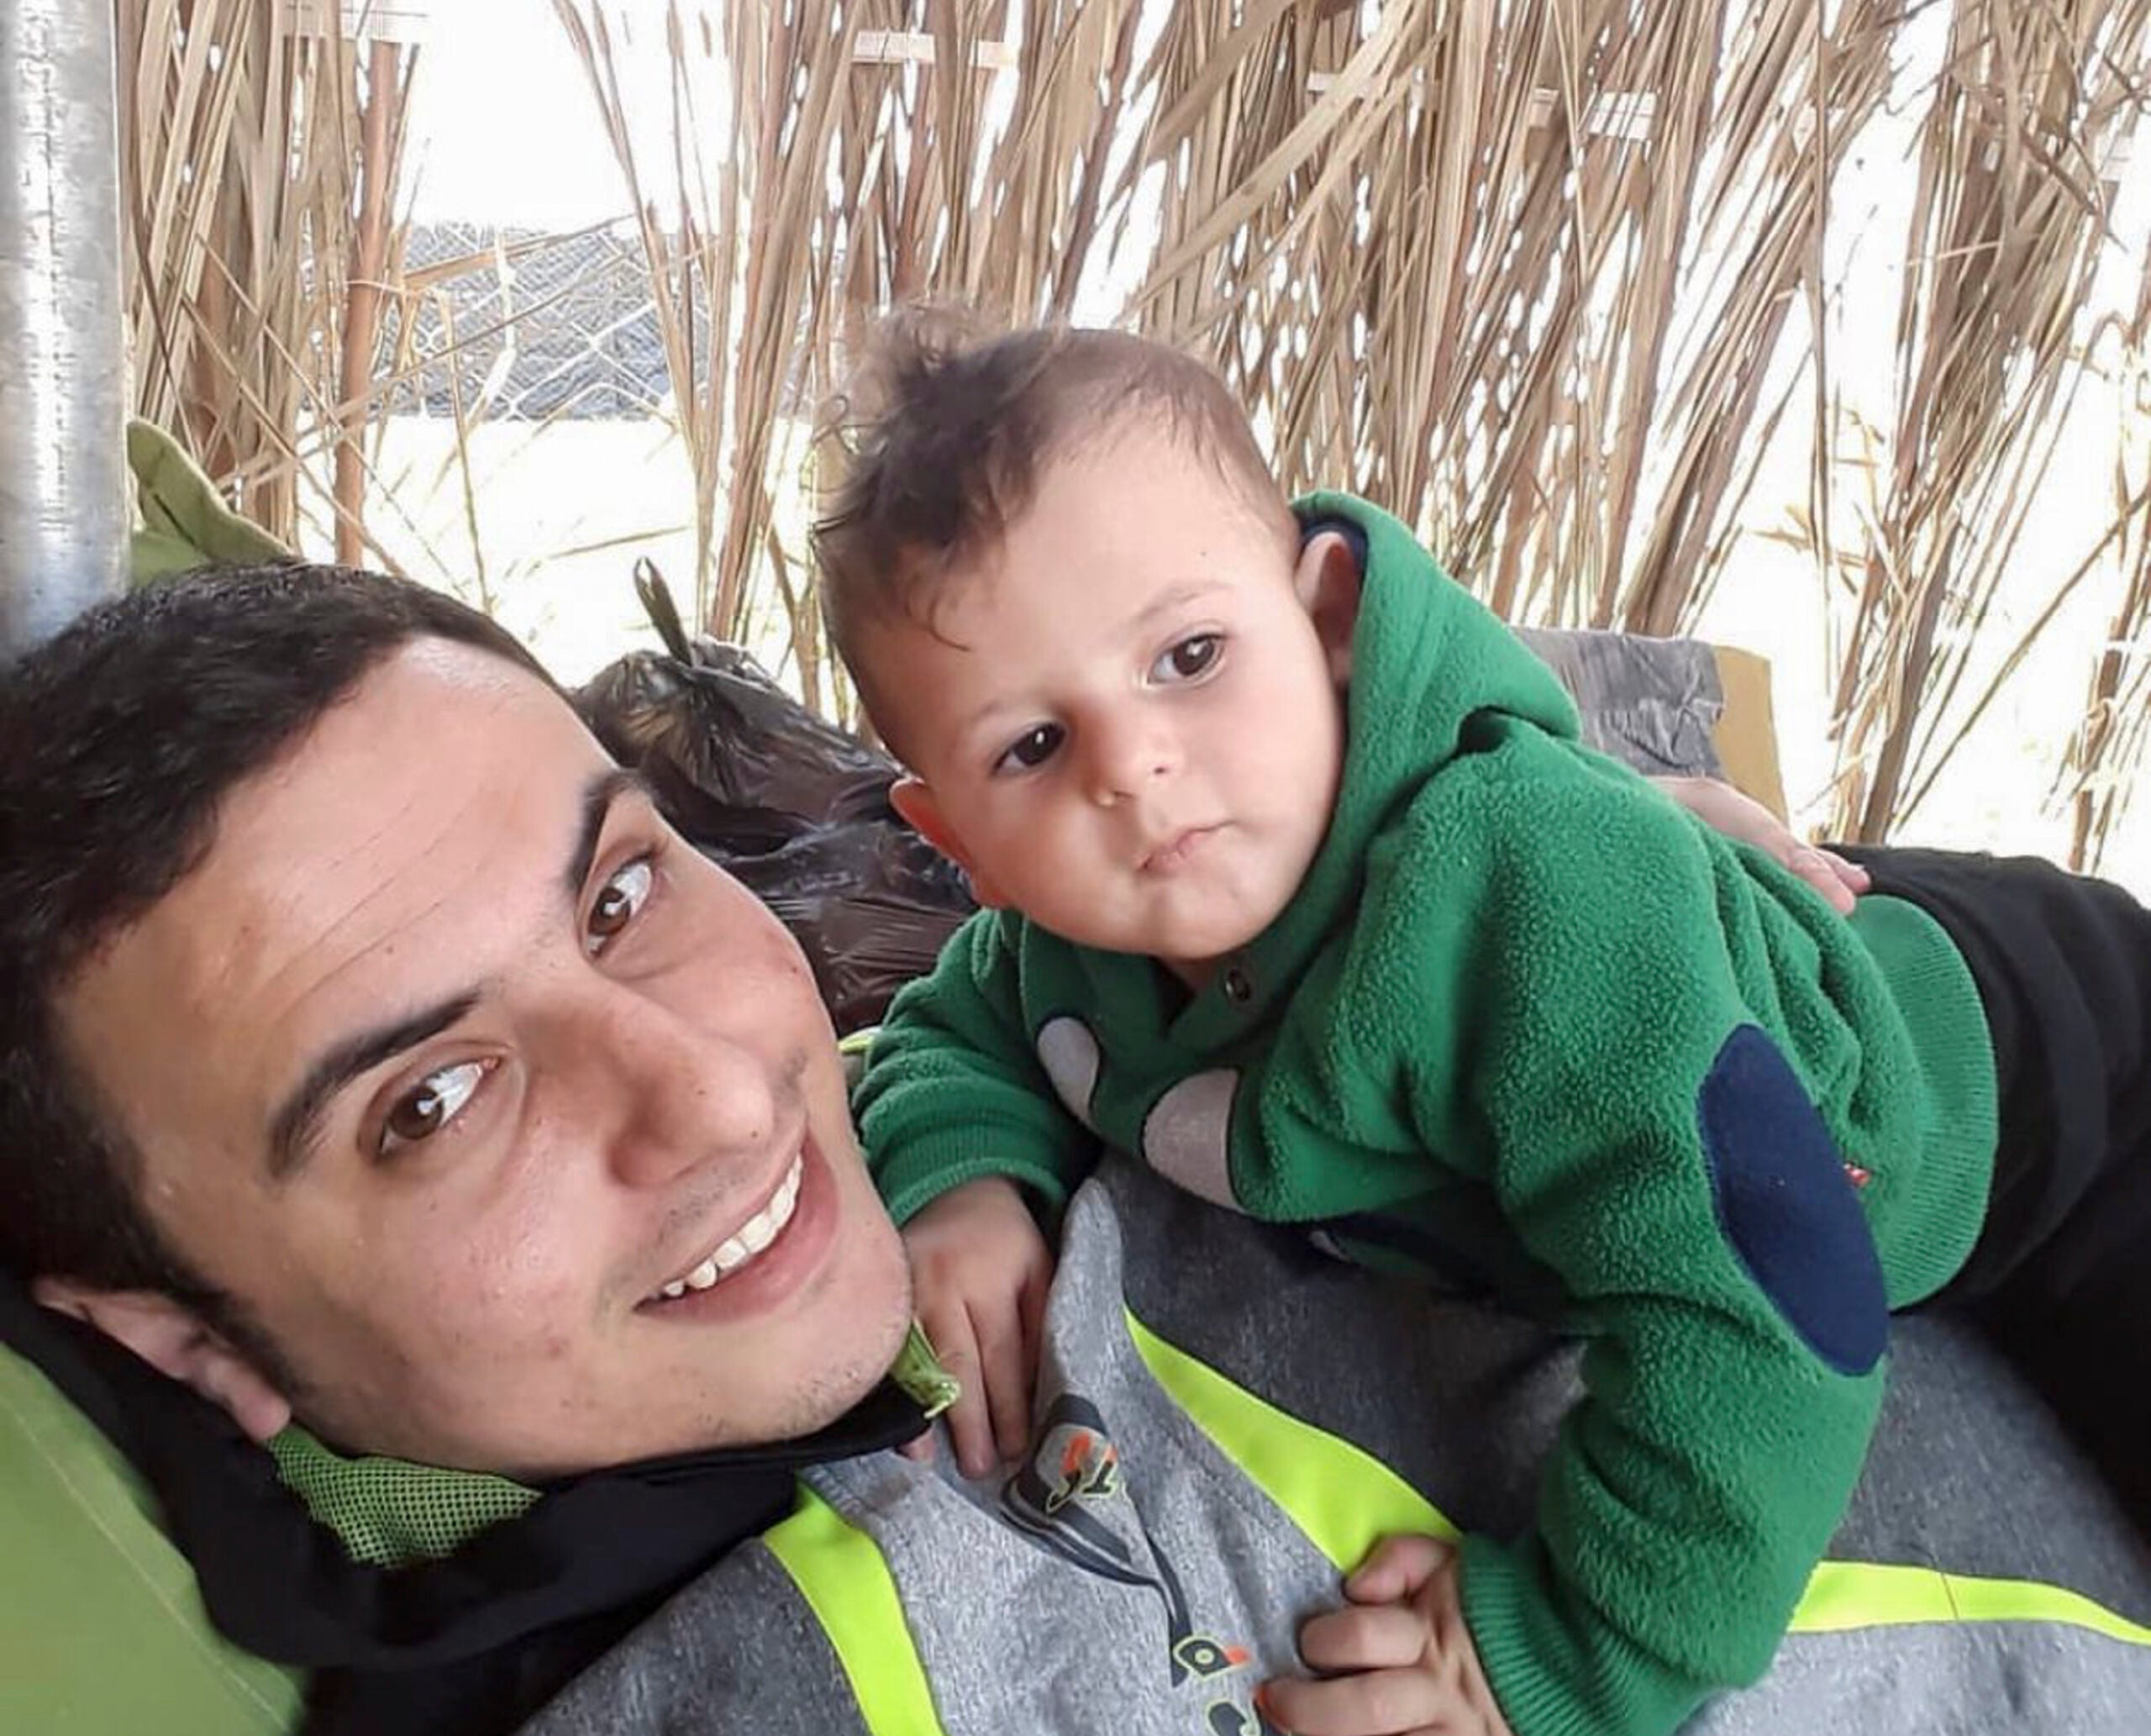 Ahmed al-Naouq in a selfie with his nephew Abdullah al-Naouq.